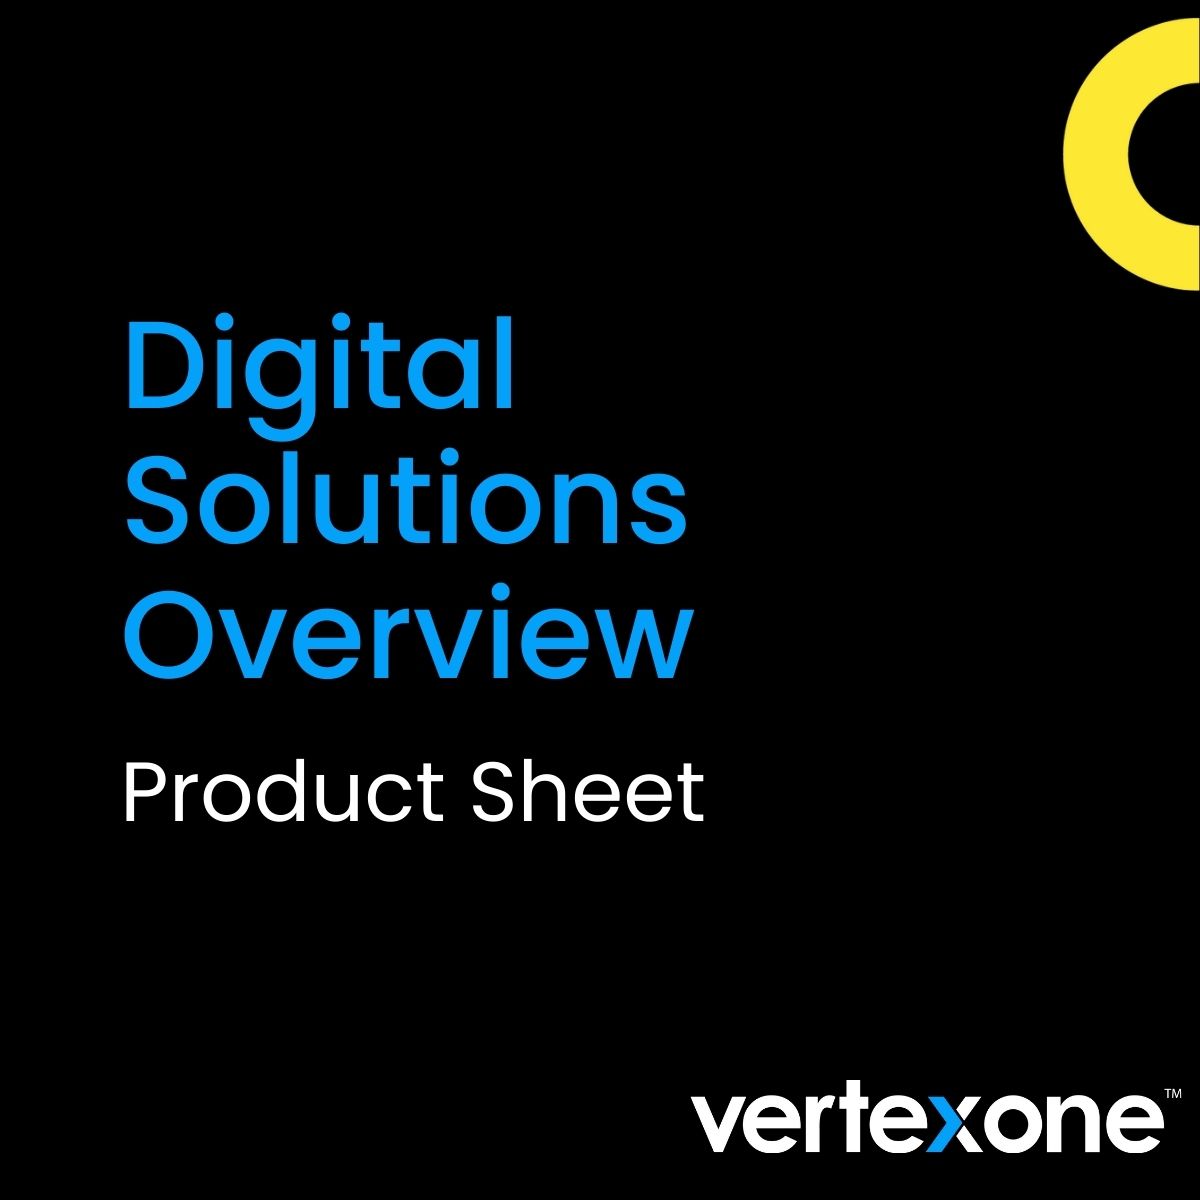 Digital Solutions Overview Product Sheet